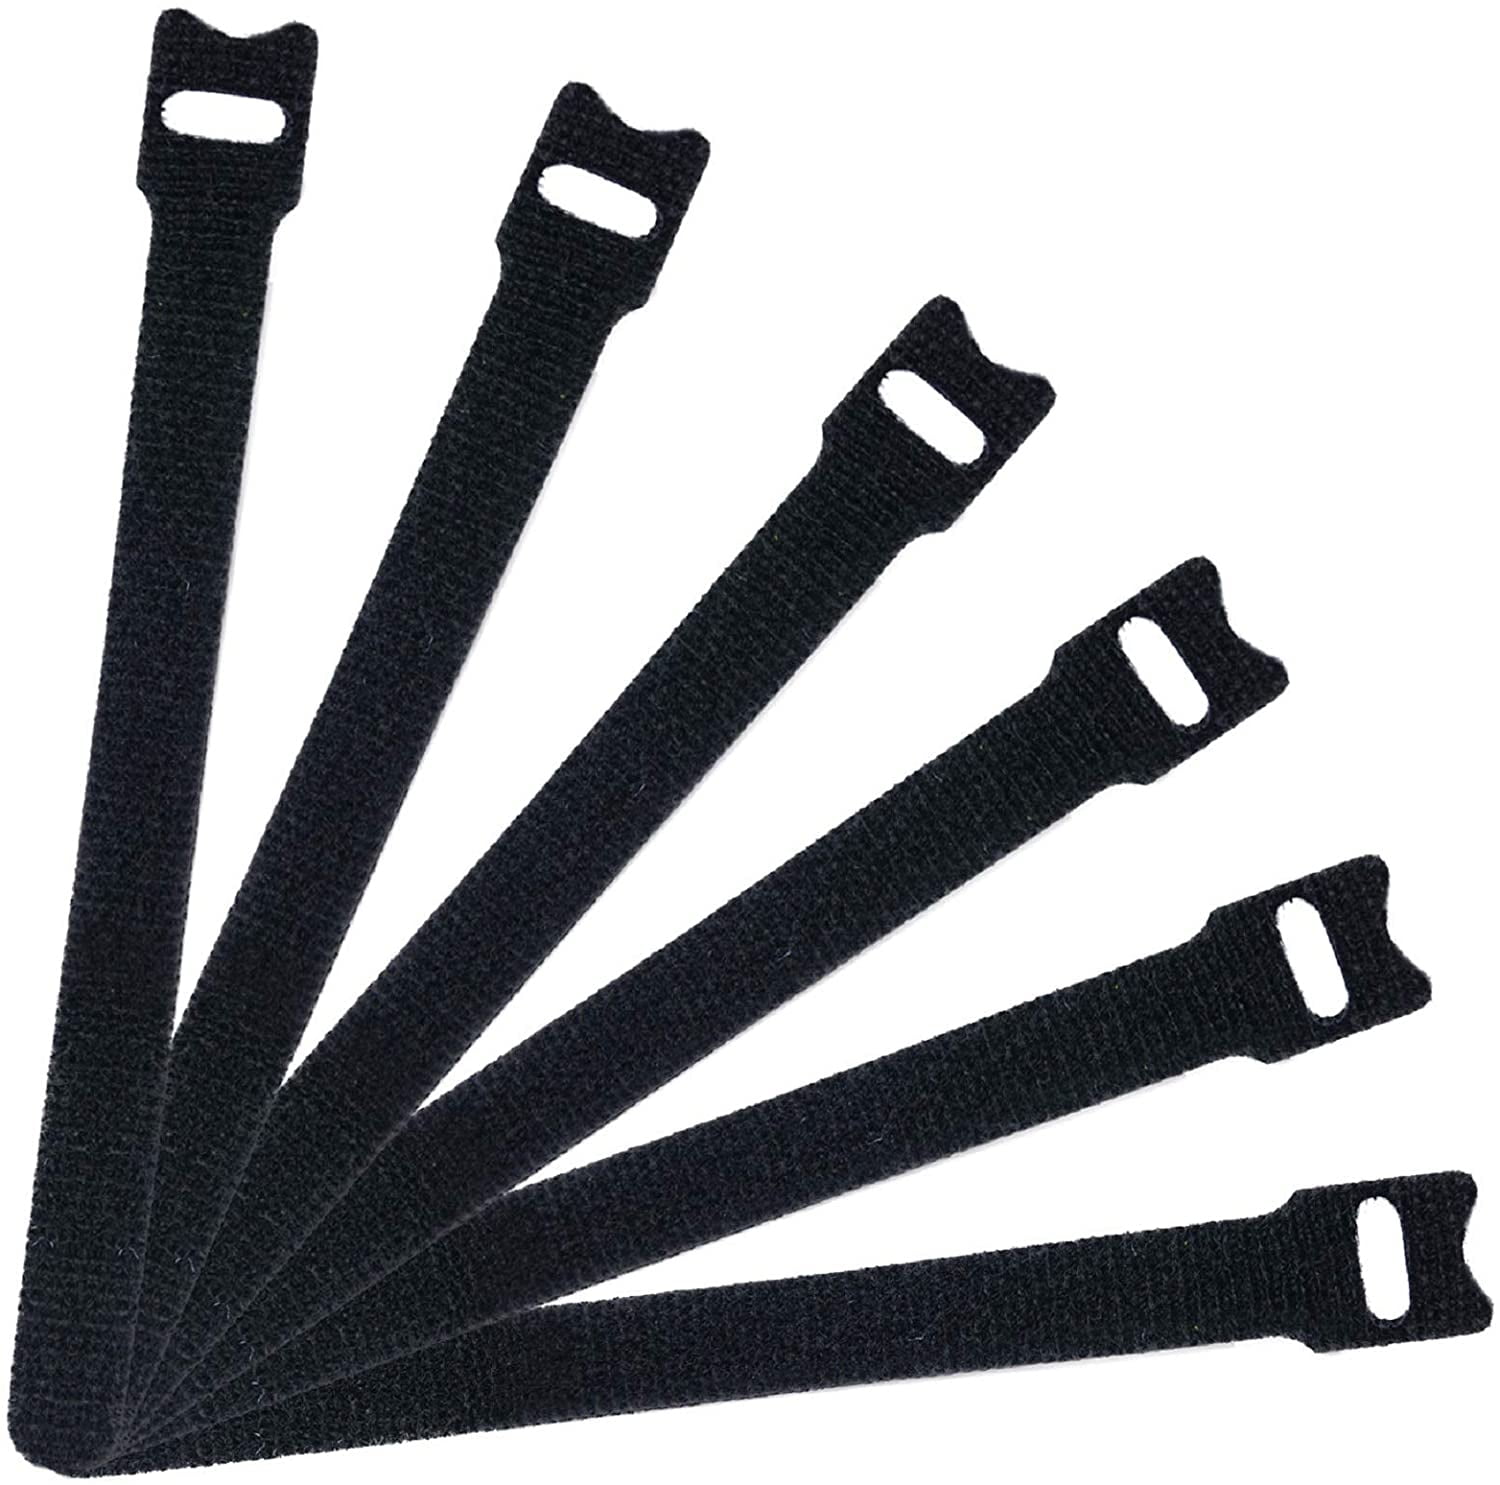 50 pcs Reusable 10" Fastening Cable Ties Straps Hook and Loop Adjustable Cord 